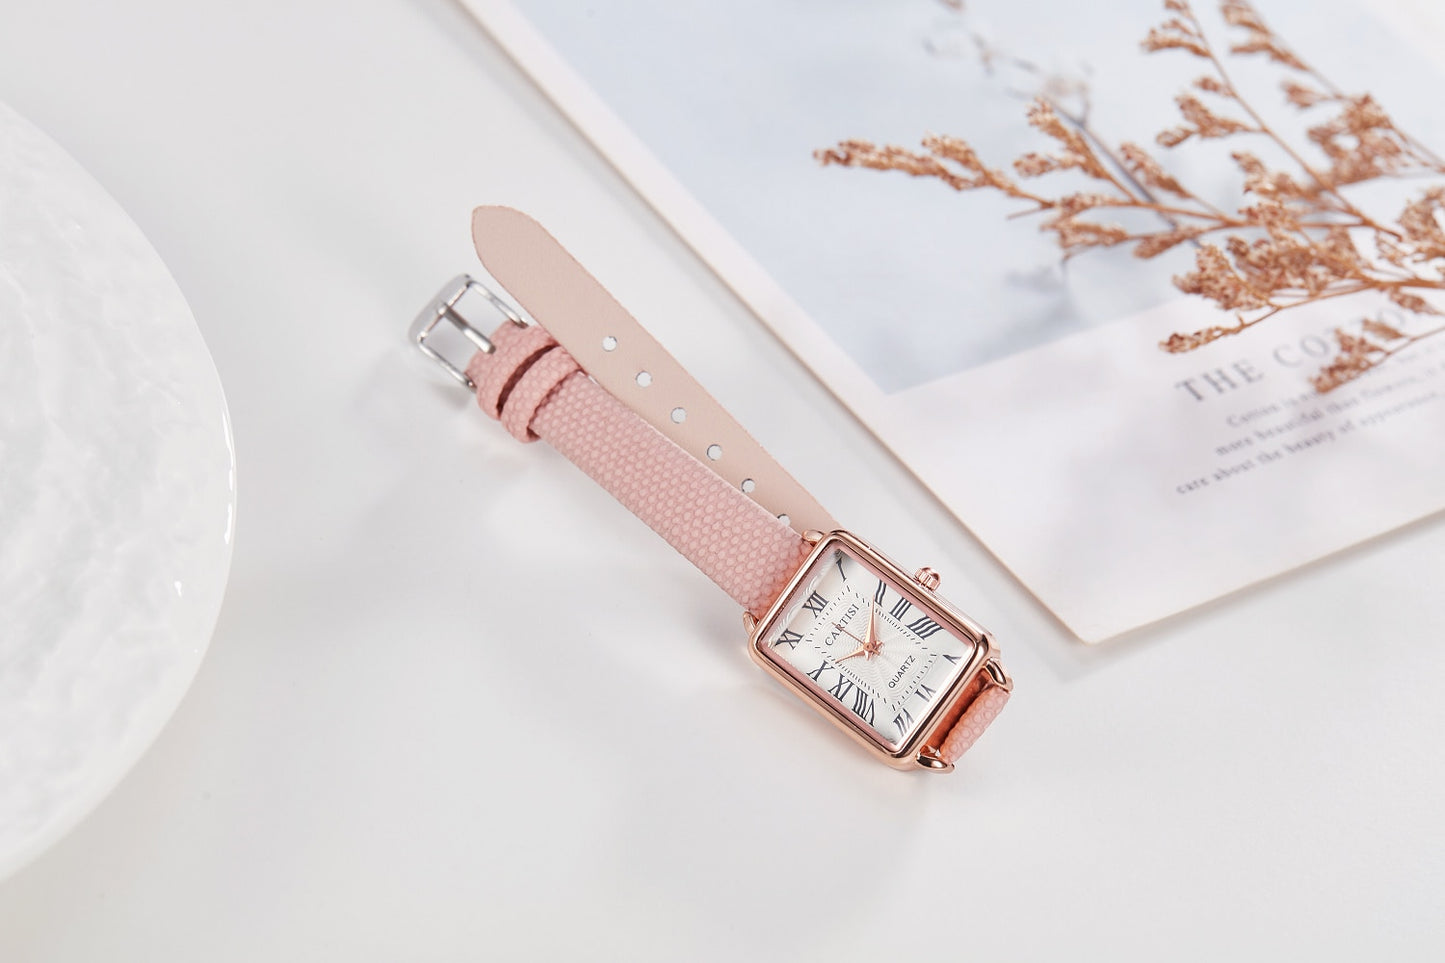 Reloj para Mujeres Fashion Designer Rectangle Dial Quartz Watch For Women's Watch Casual Leather Strap Luxury Business Wristwatch